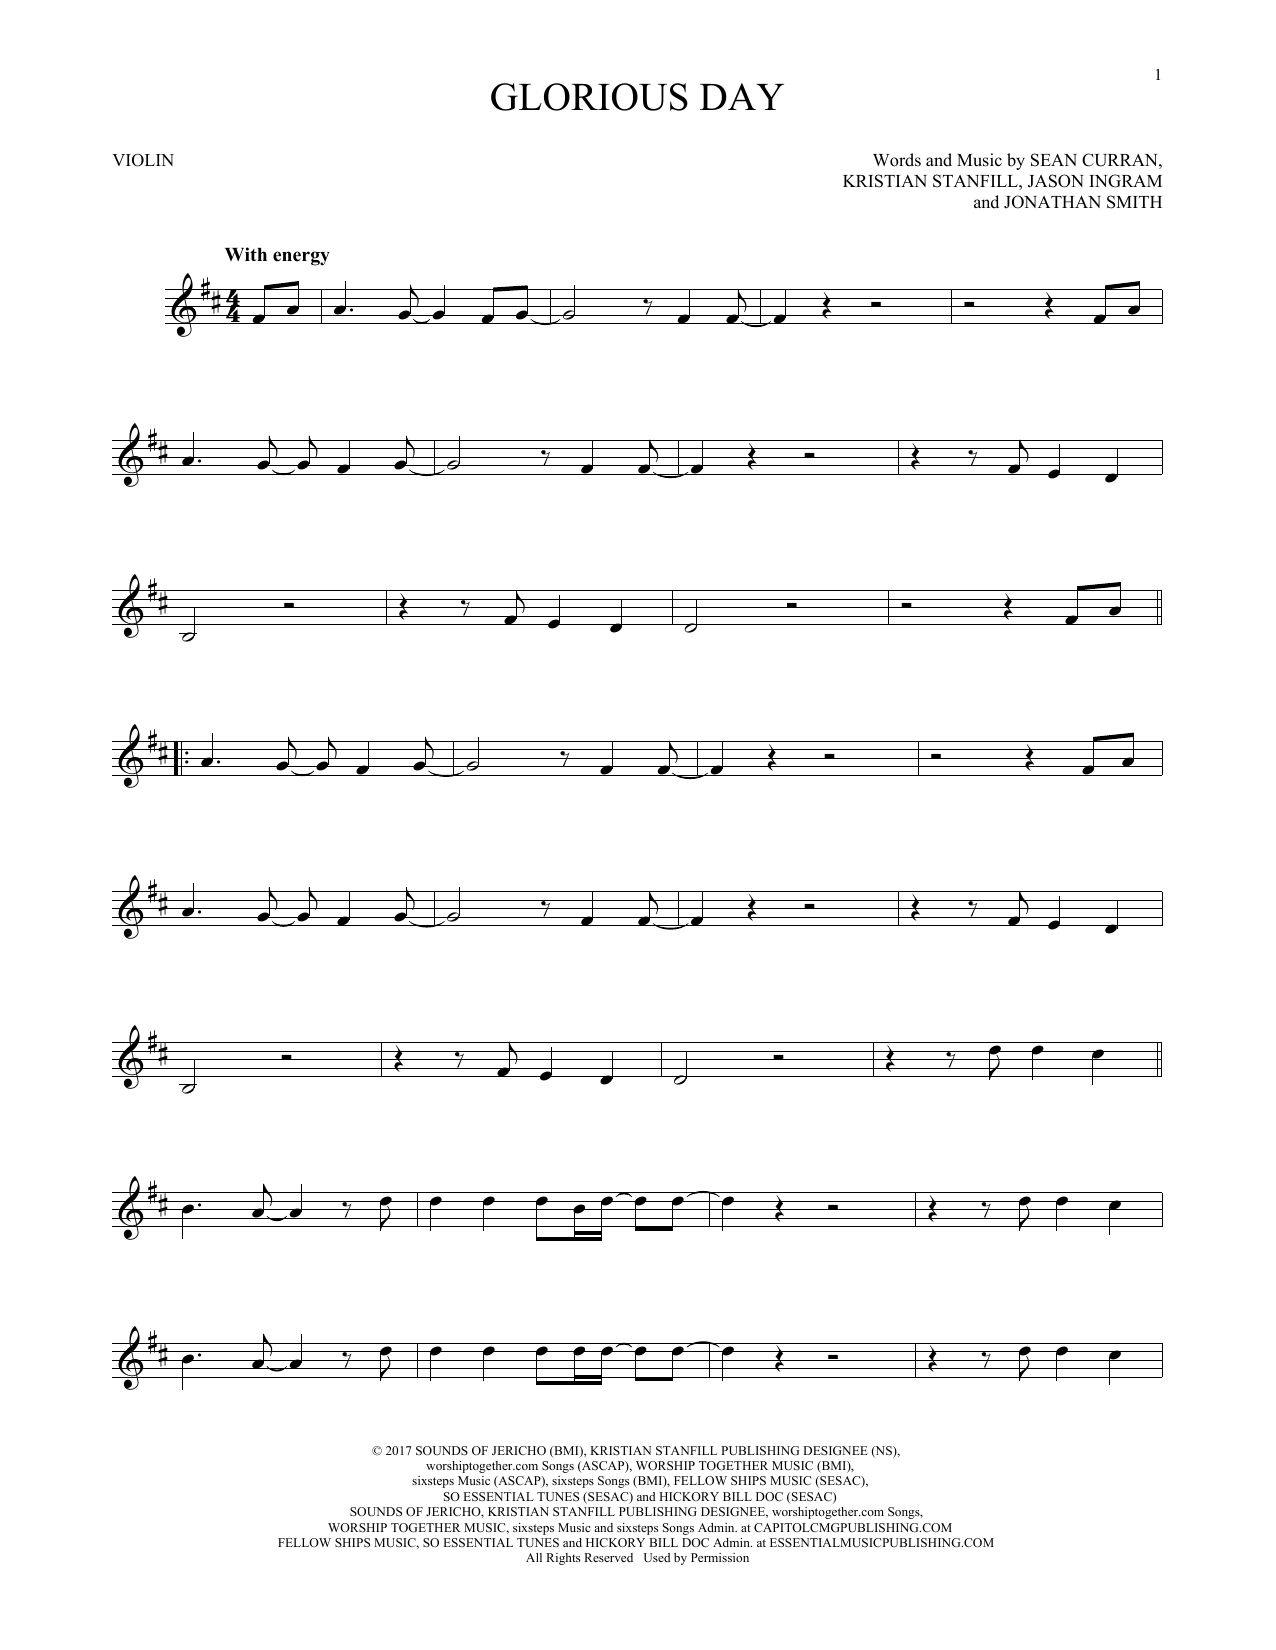 Passion & Kristian Stanfill Glorious Day sheet music notes printable PDF score